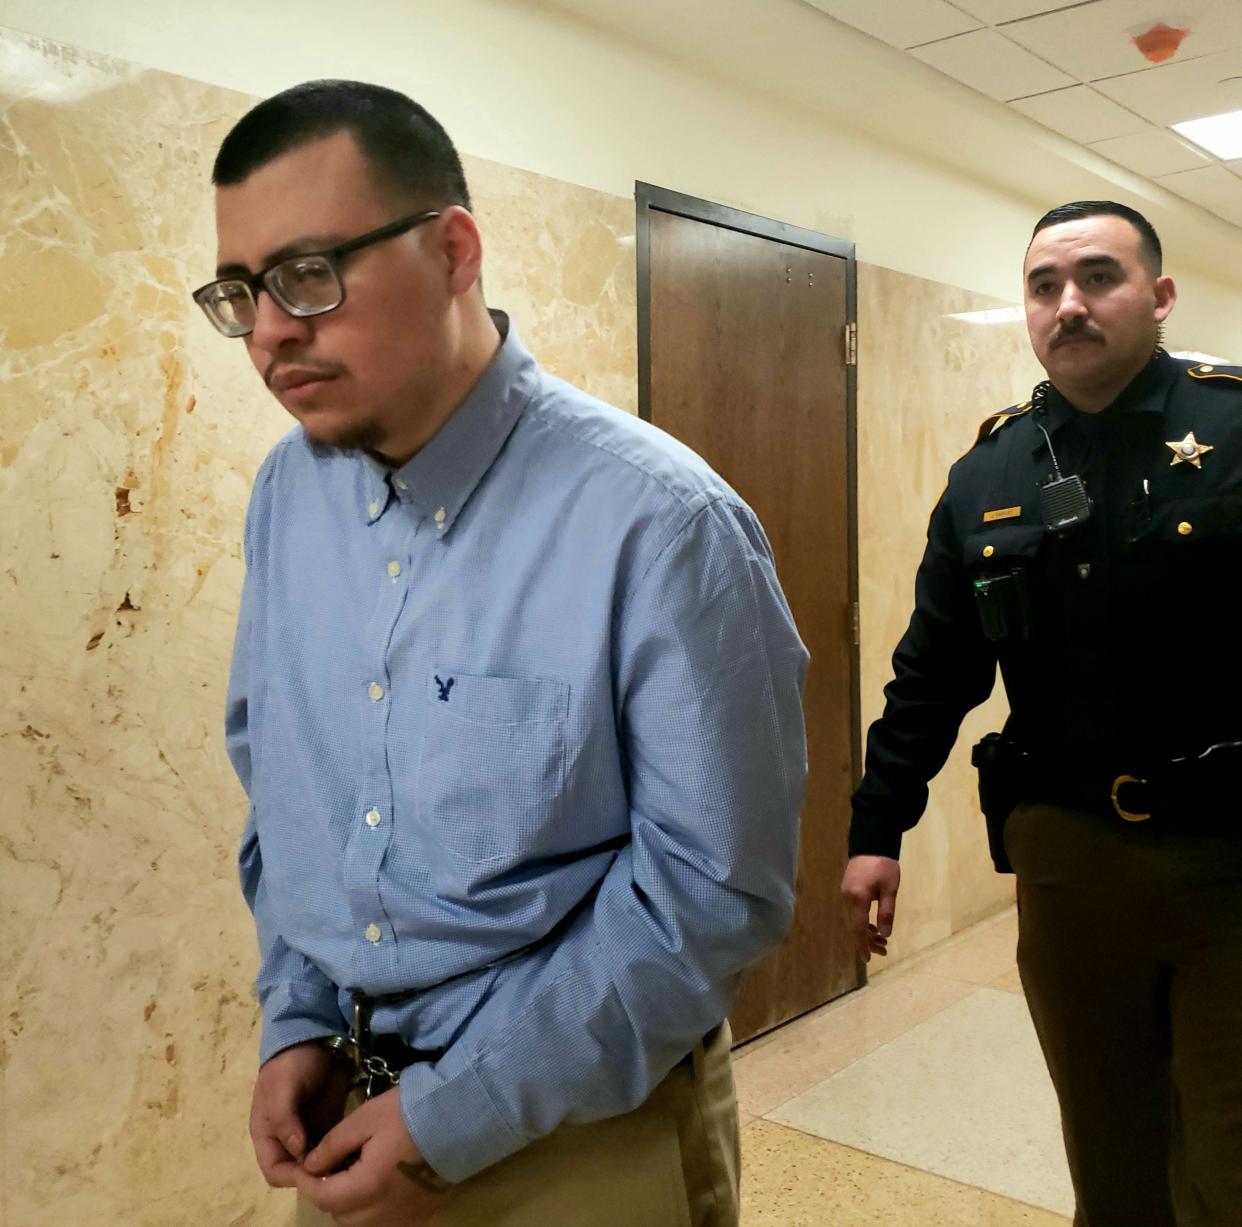 Luis Munoz is escorted out of the 140th District Court where a jury sentenced him to 99 years in prison in connection with a 2020 shooting during an armed robbery that left a man paralyzed from the chest down.